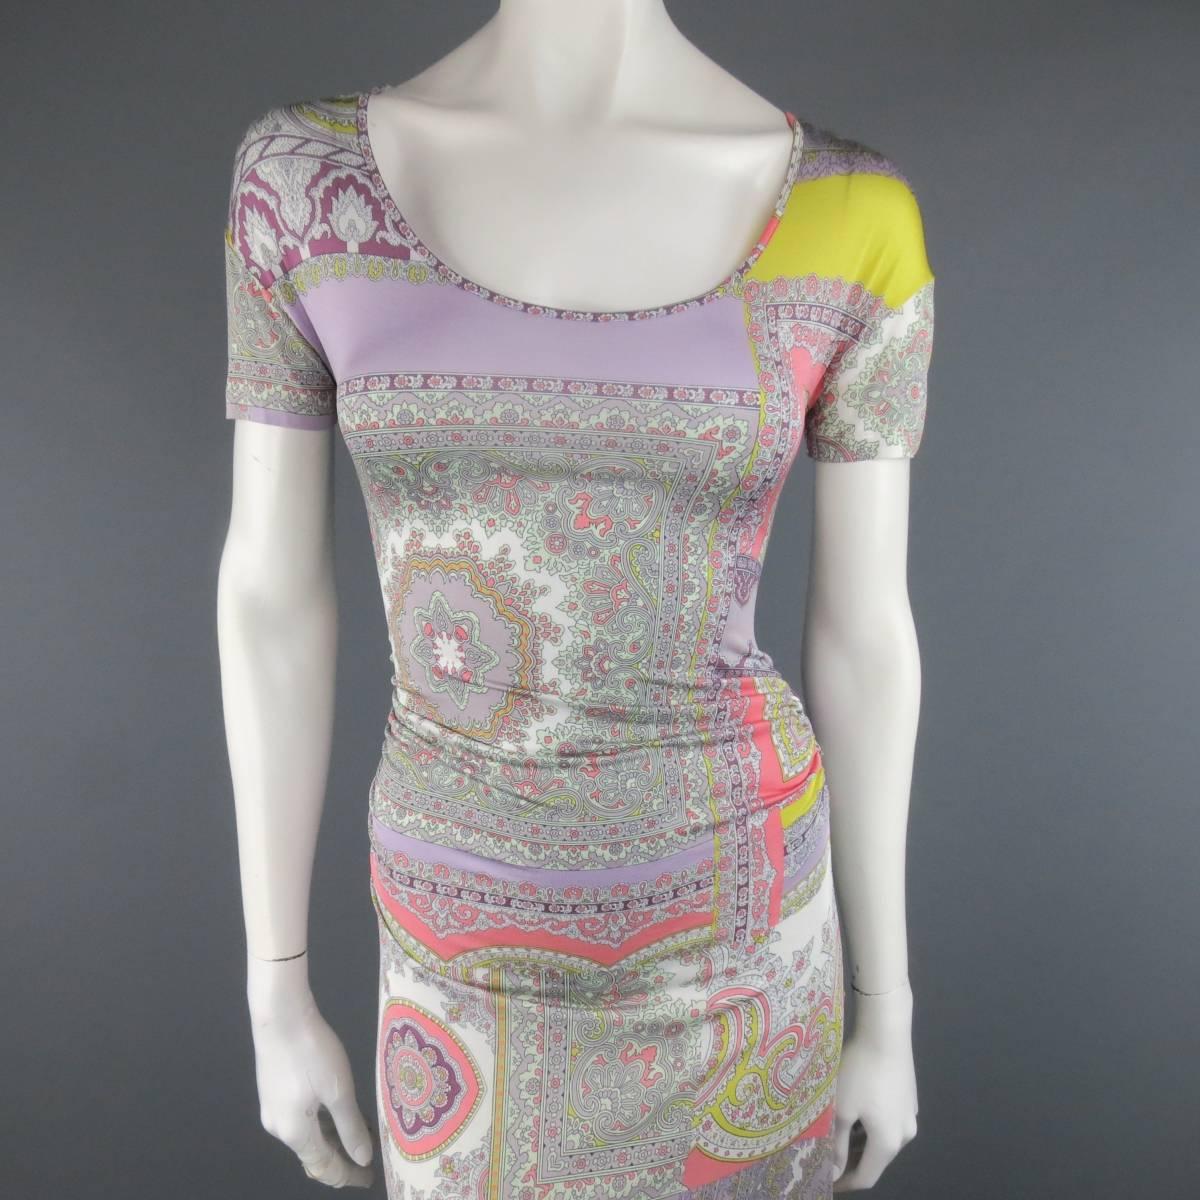 ETRO viscose blend jersey sheath dress with generous stretch in a lilac grey with pastel yellow and pink block paisley bandana print featuring a scoop neck, shorts sleeves, and A-line midi skirt with gathering along the waist. Made in Italy.
 
Good